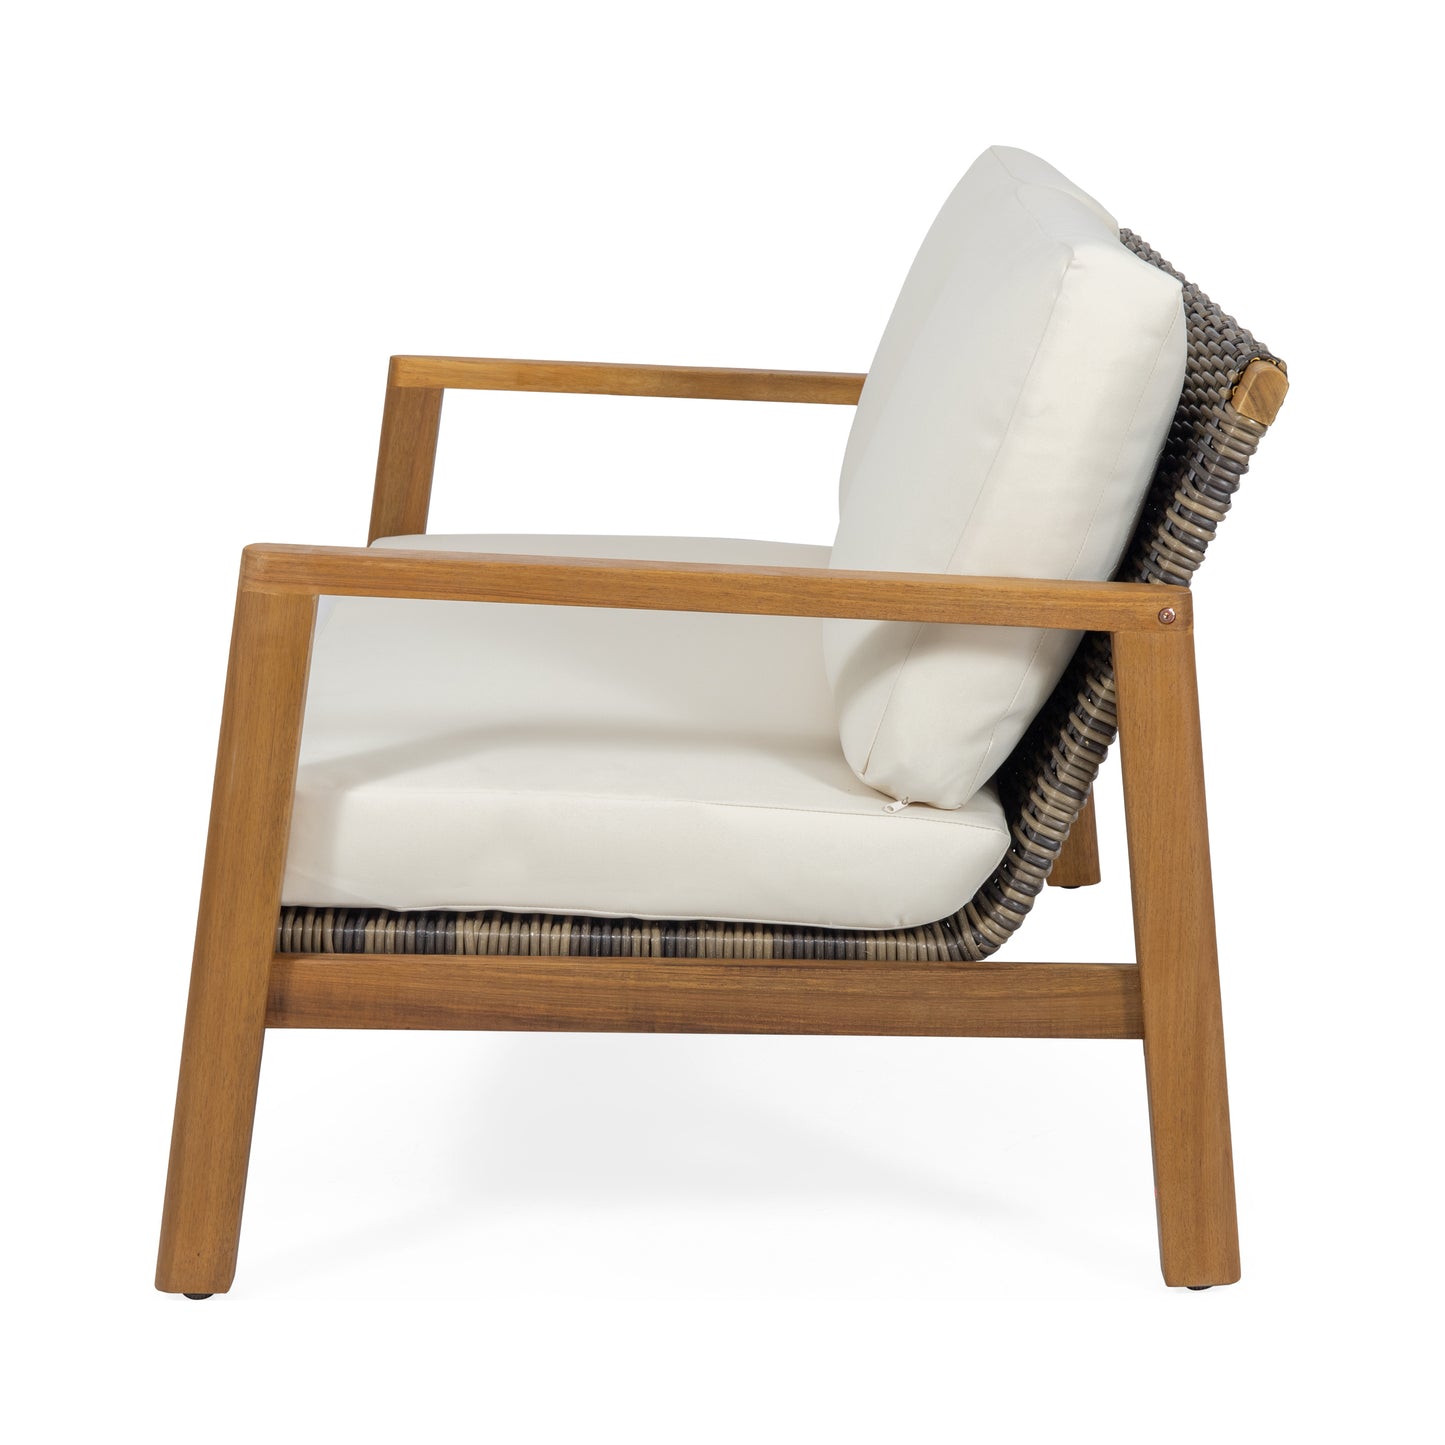 Kedan Outdoor Acacia Wood Loveseat with Wicker Accents